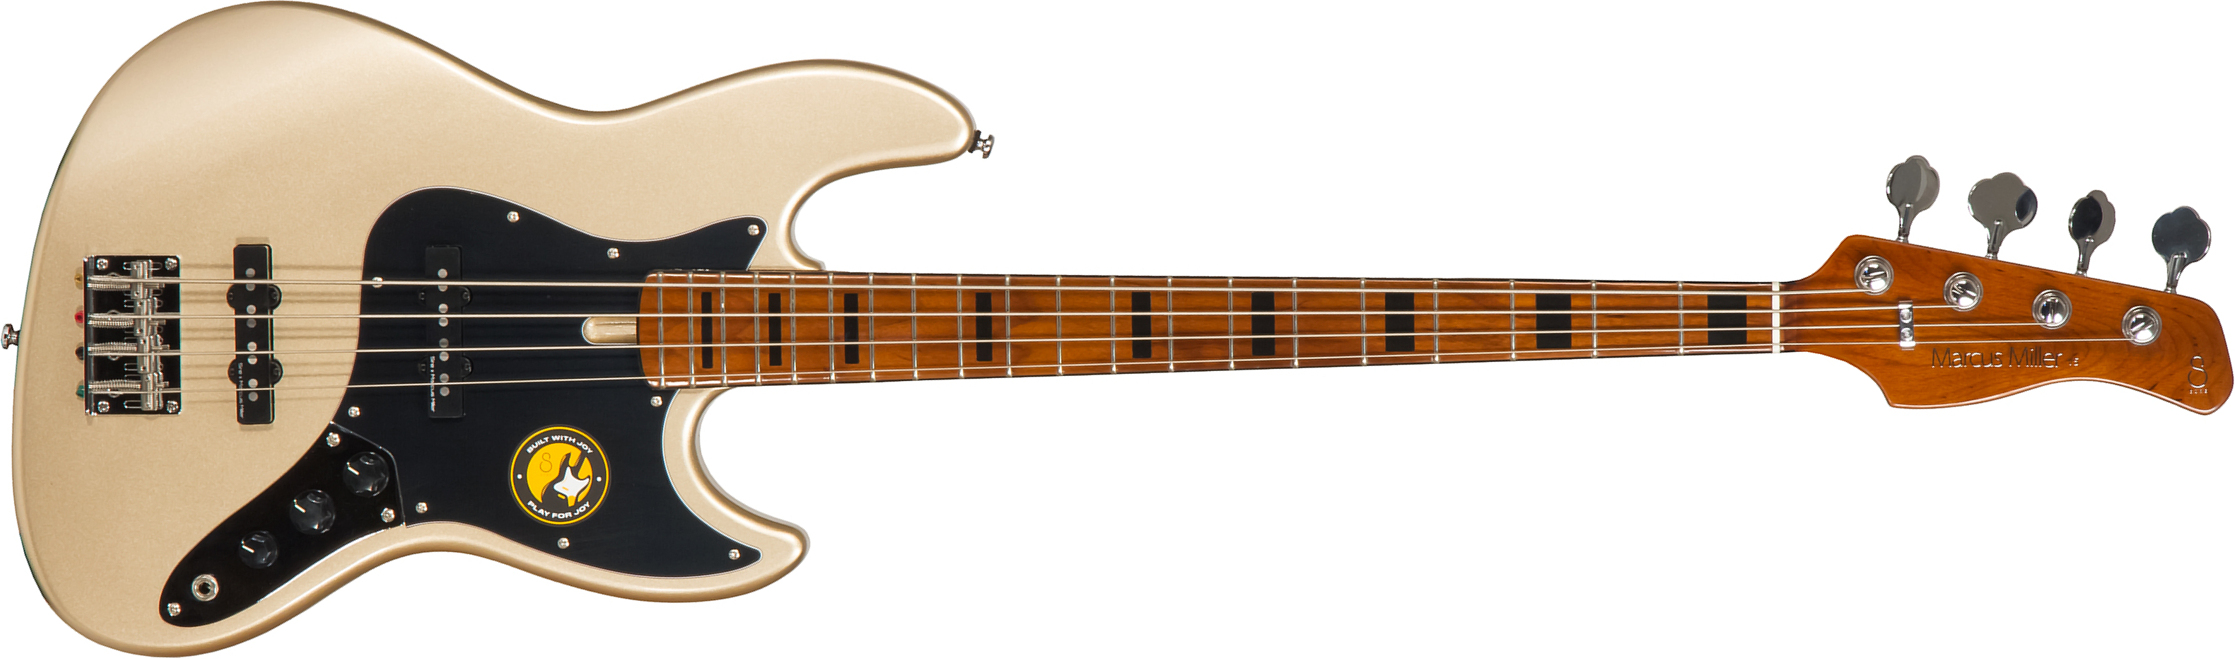 Marcus Miller V5 4st Mn - Champagne Gold Metallic - Basse Électrique Solid Body - Main picture